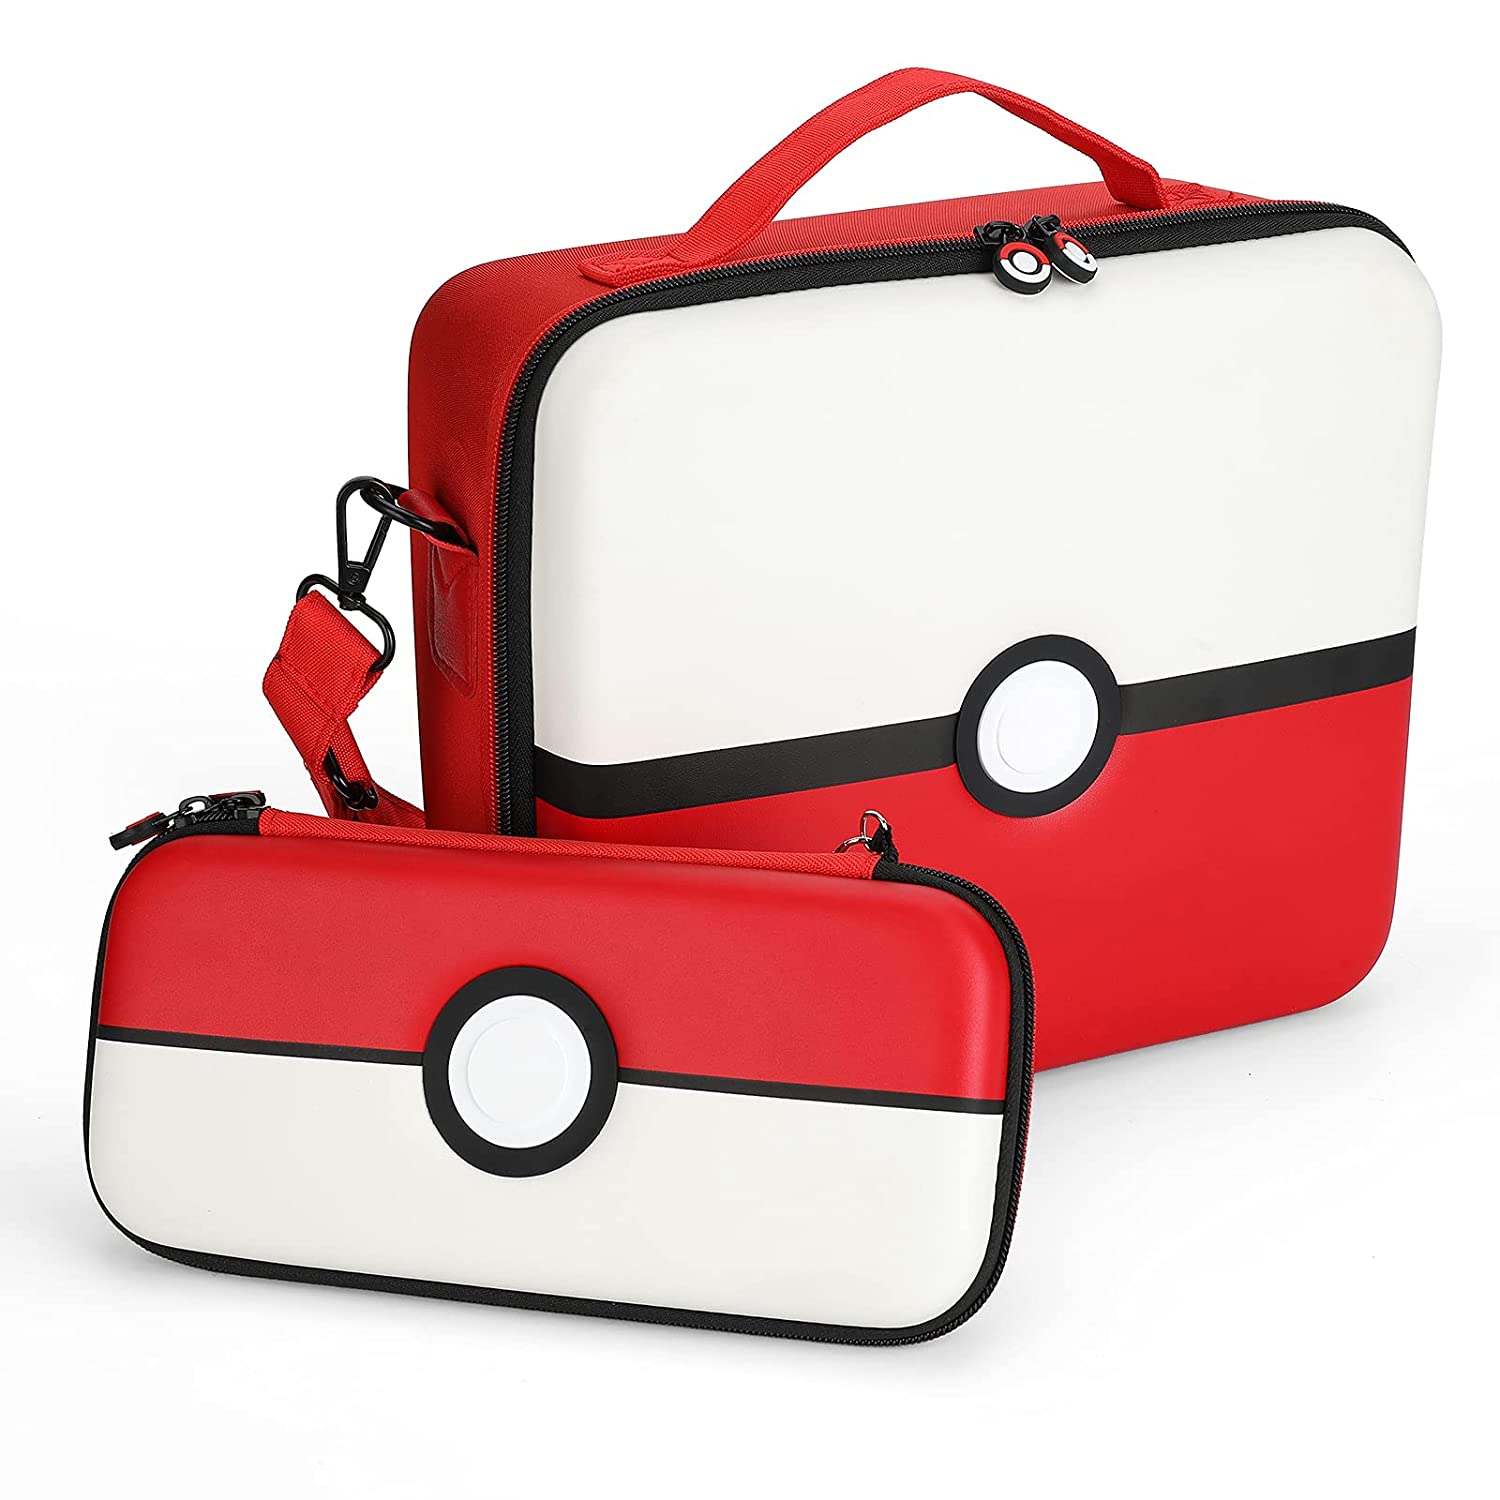 Sinnoh Champion Team Protection Case For Nintendo Switch By PowerA 